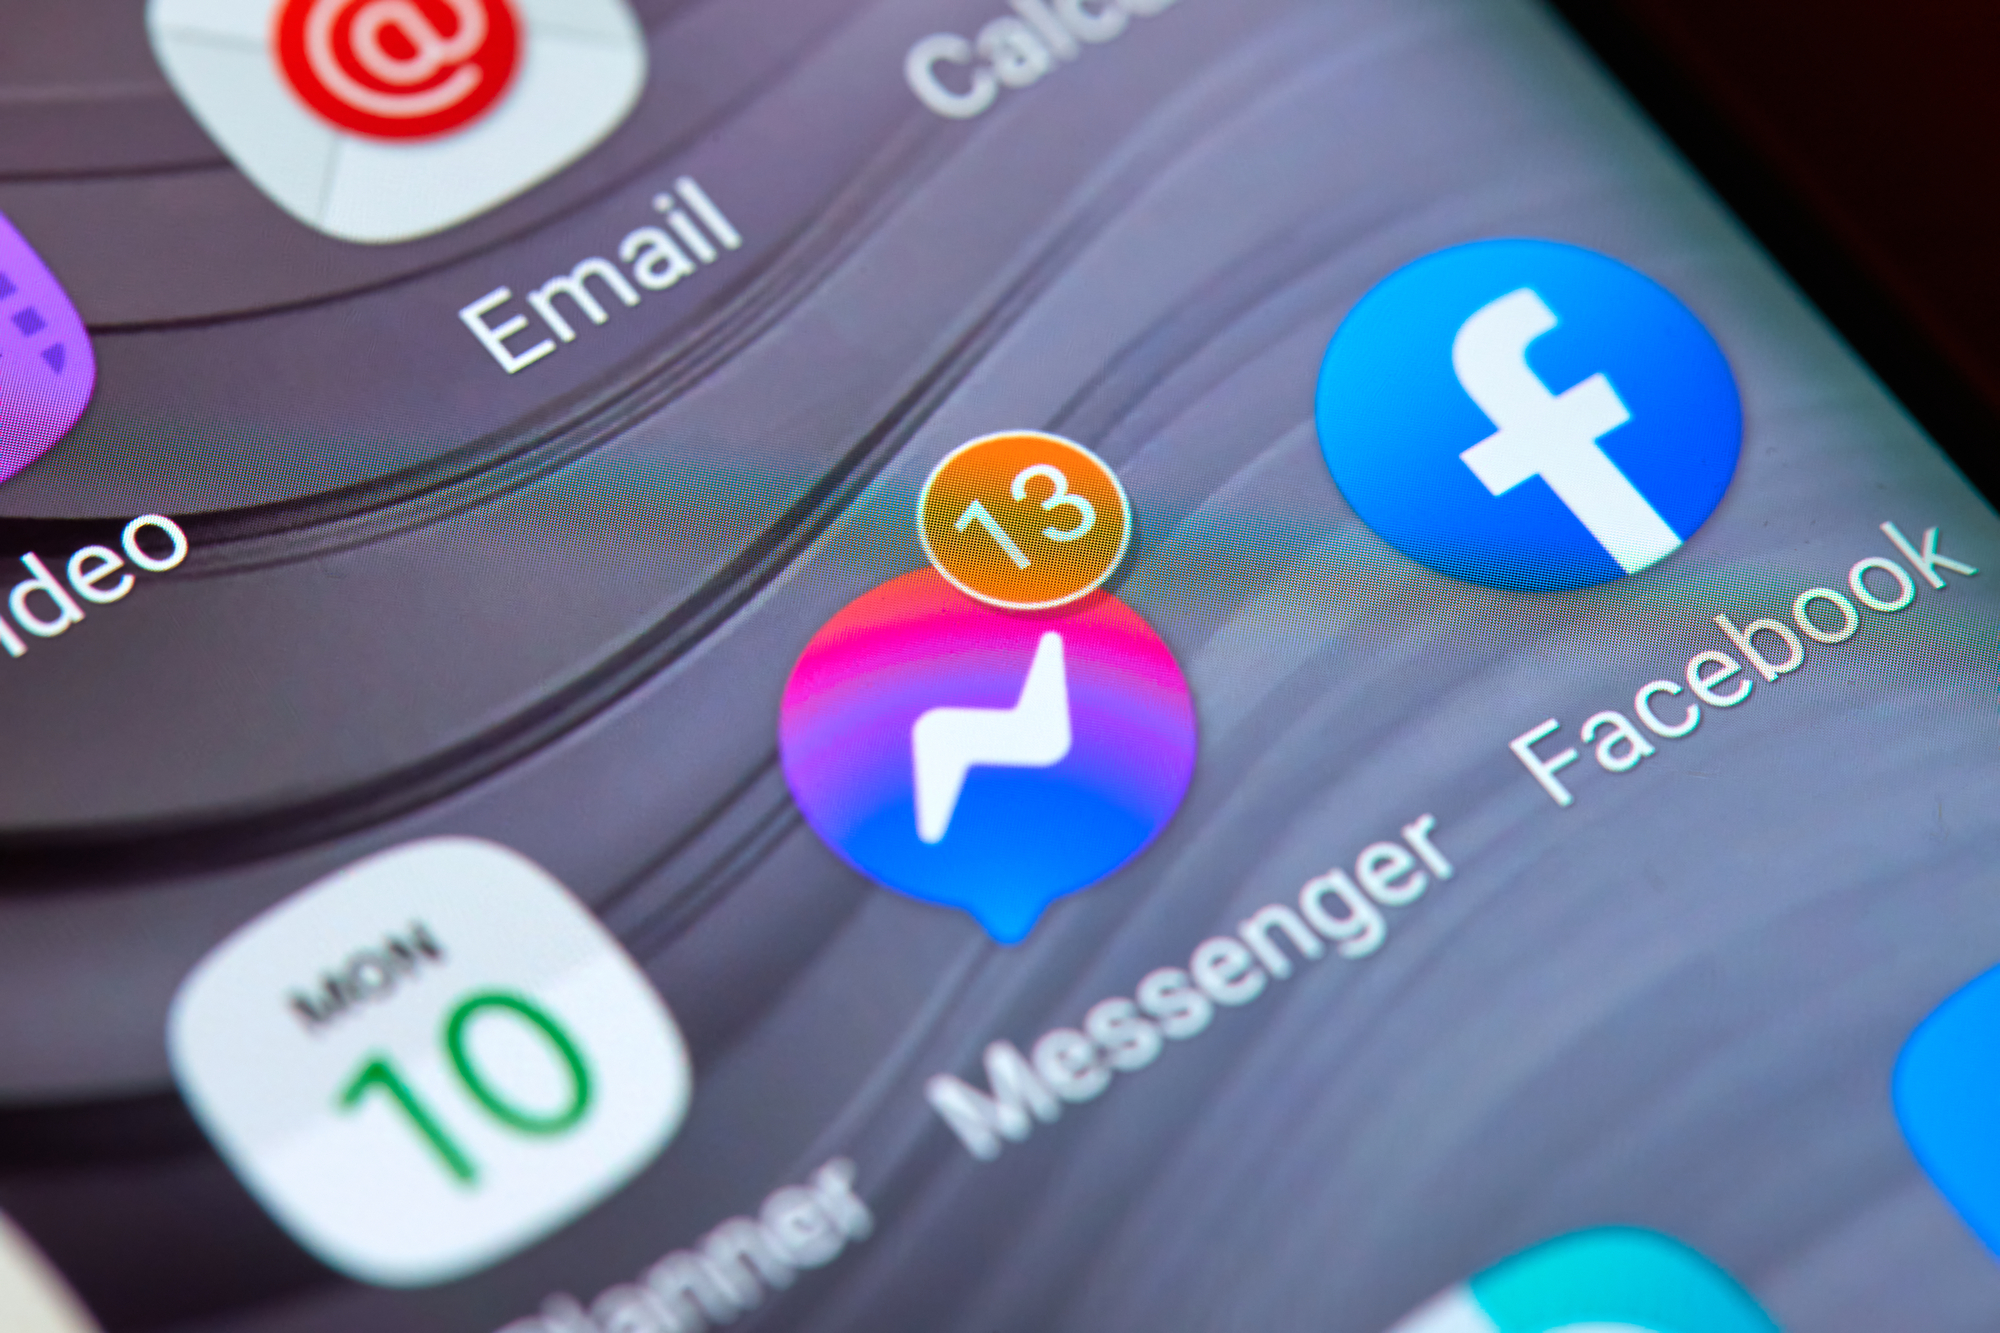 Facebook Messenger Becomes the Delivery Mechanism for Infostealer Malware Attack